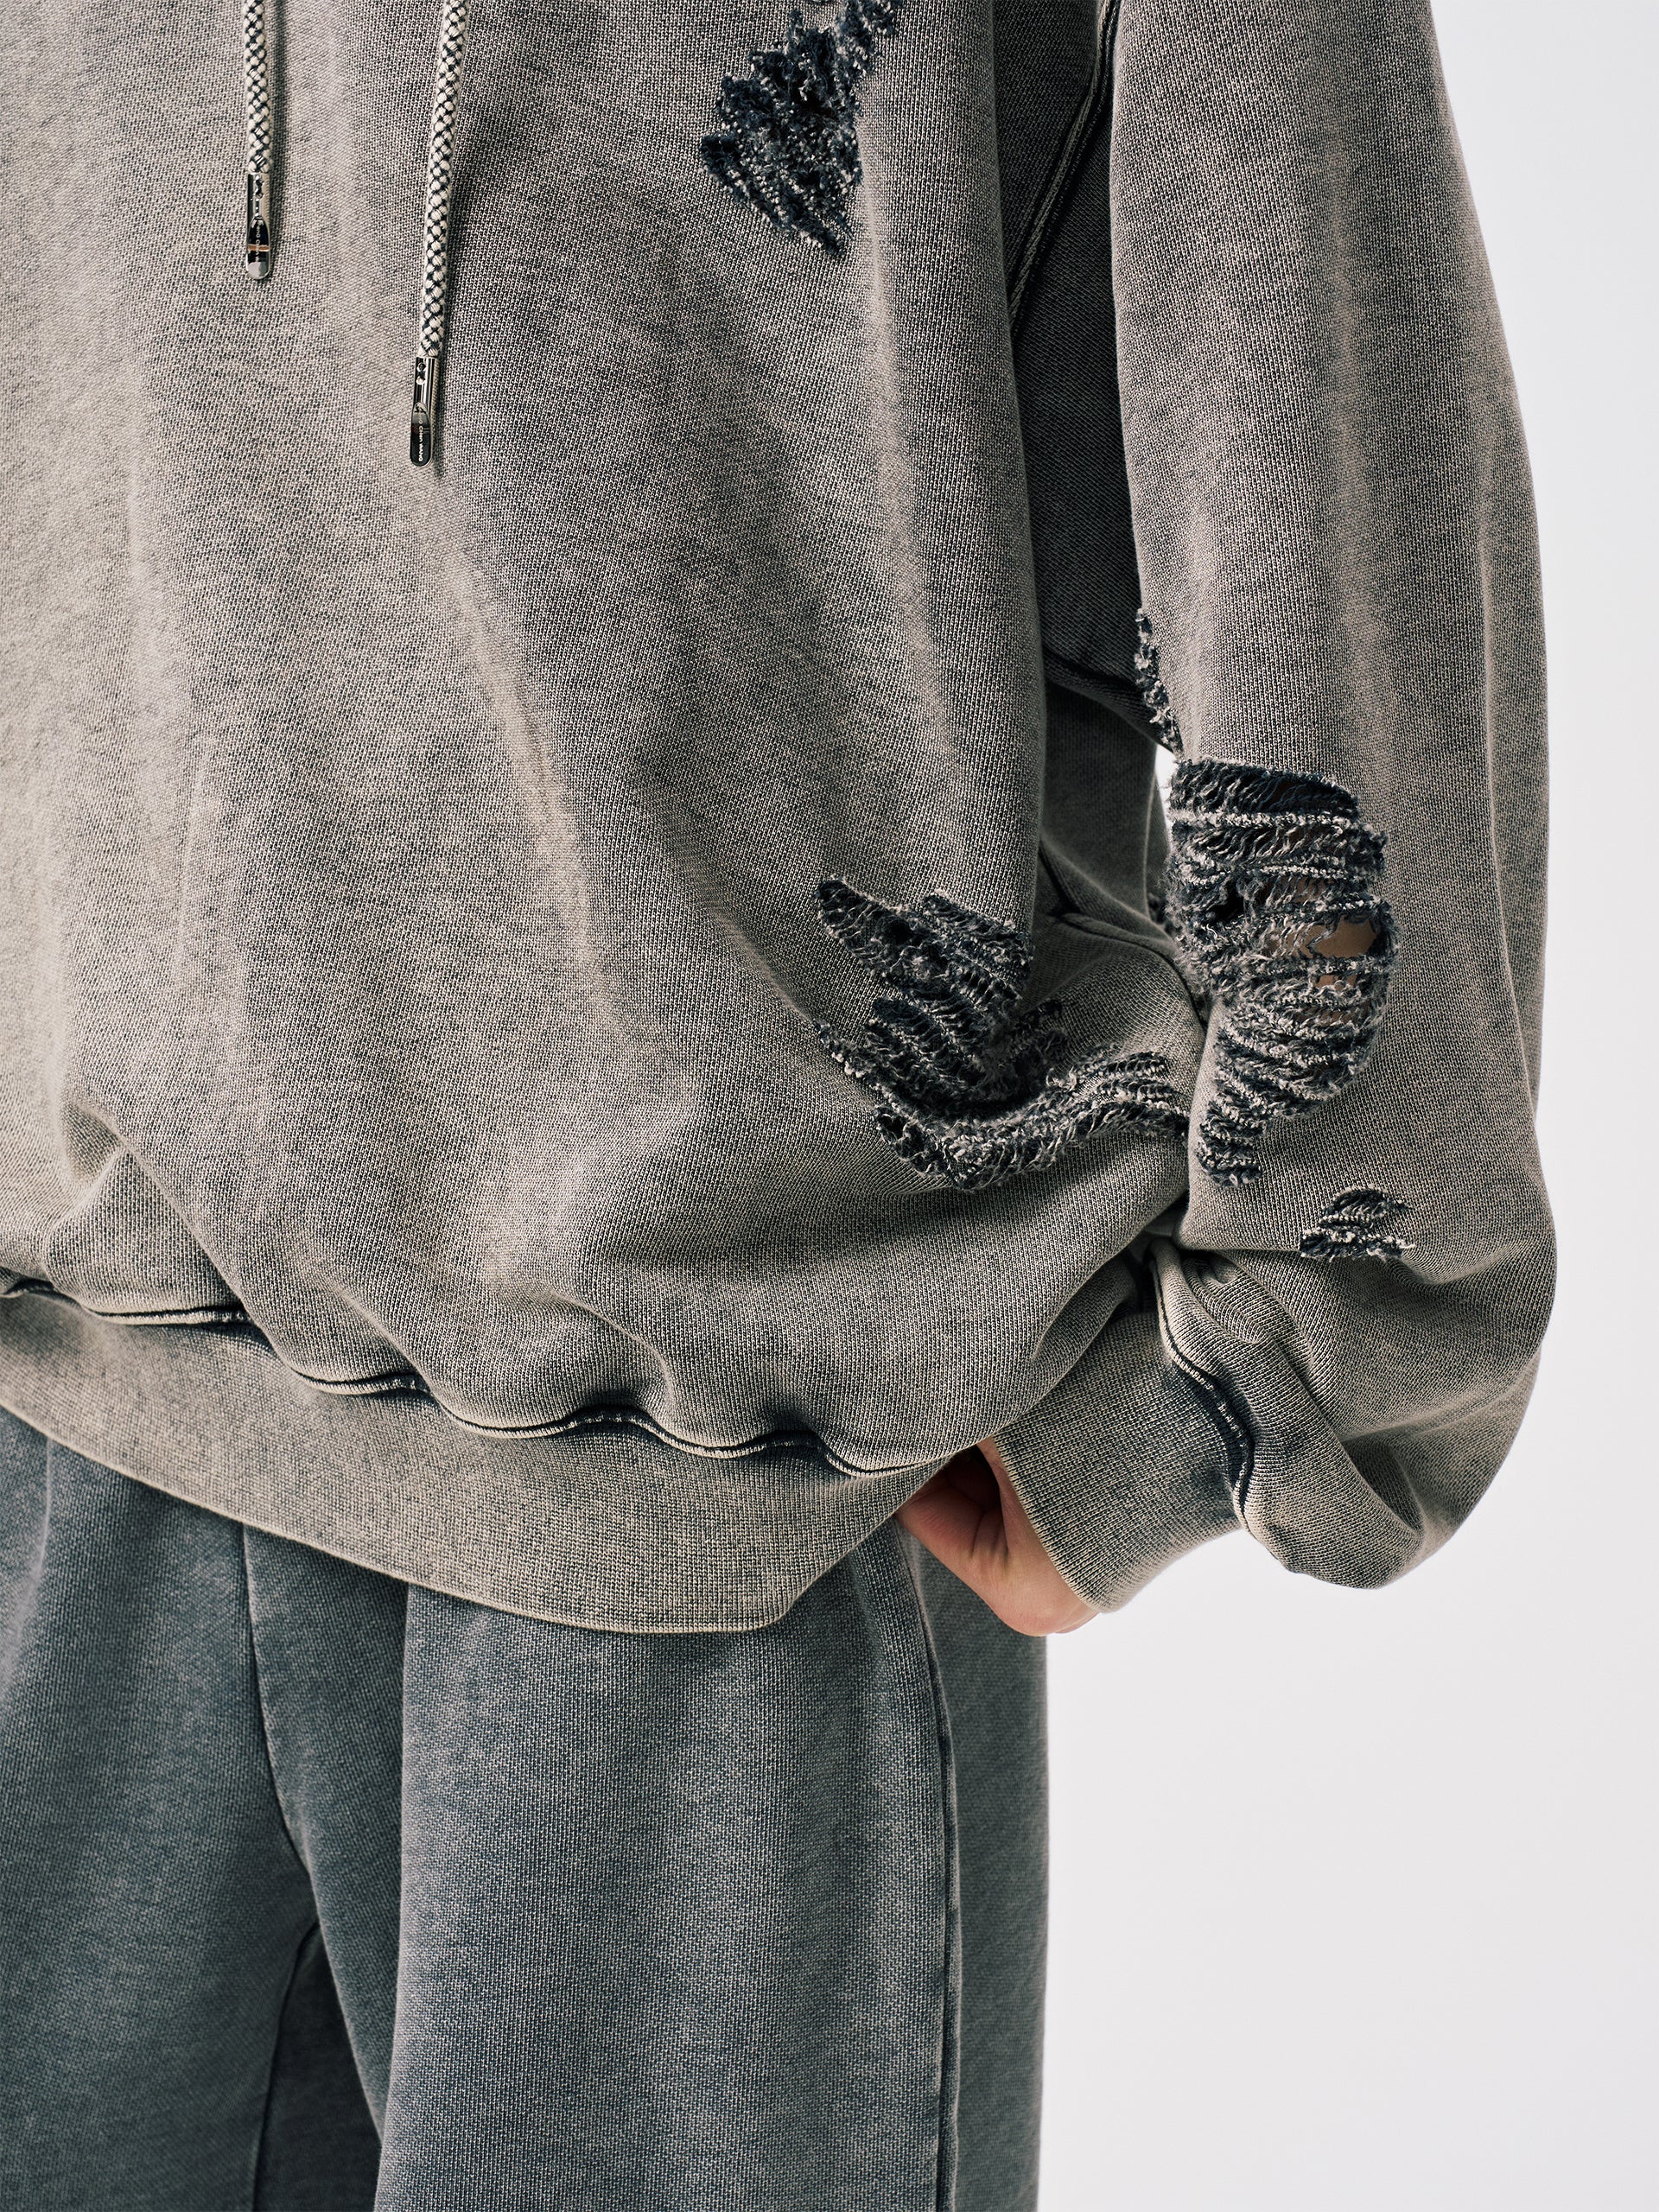 GREY RIPPED JERSEY HOODIE